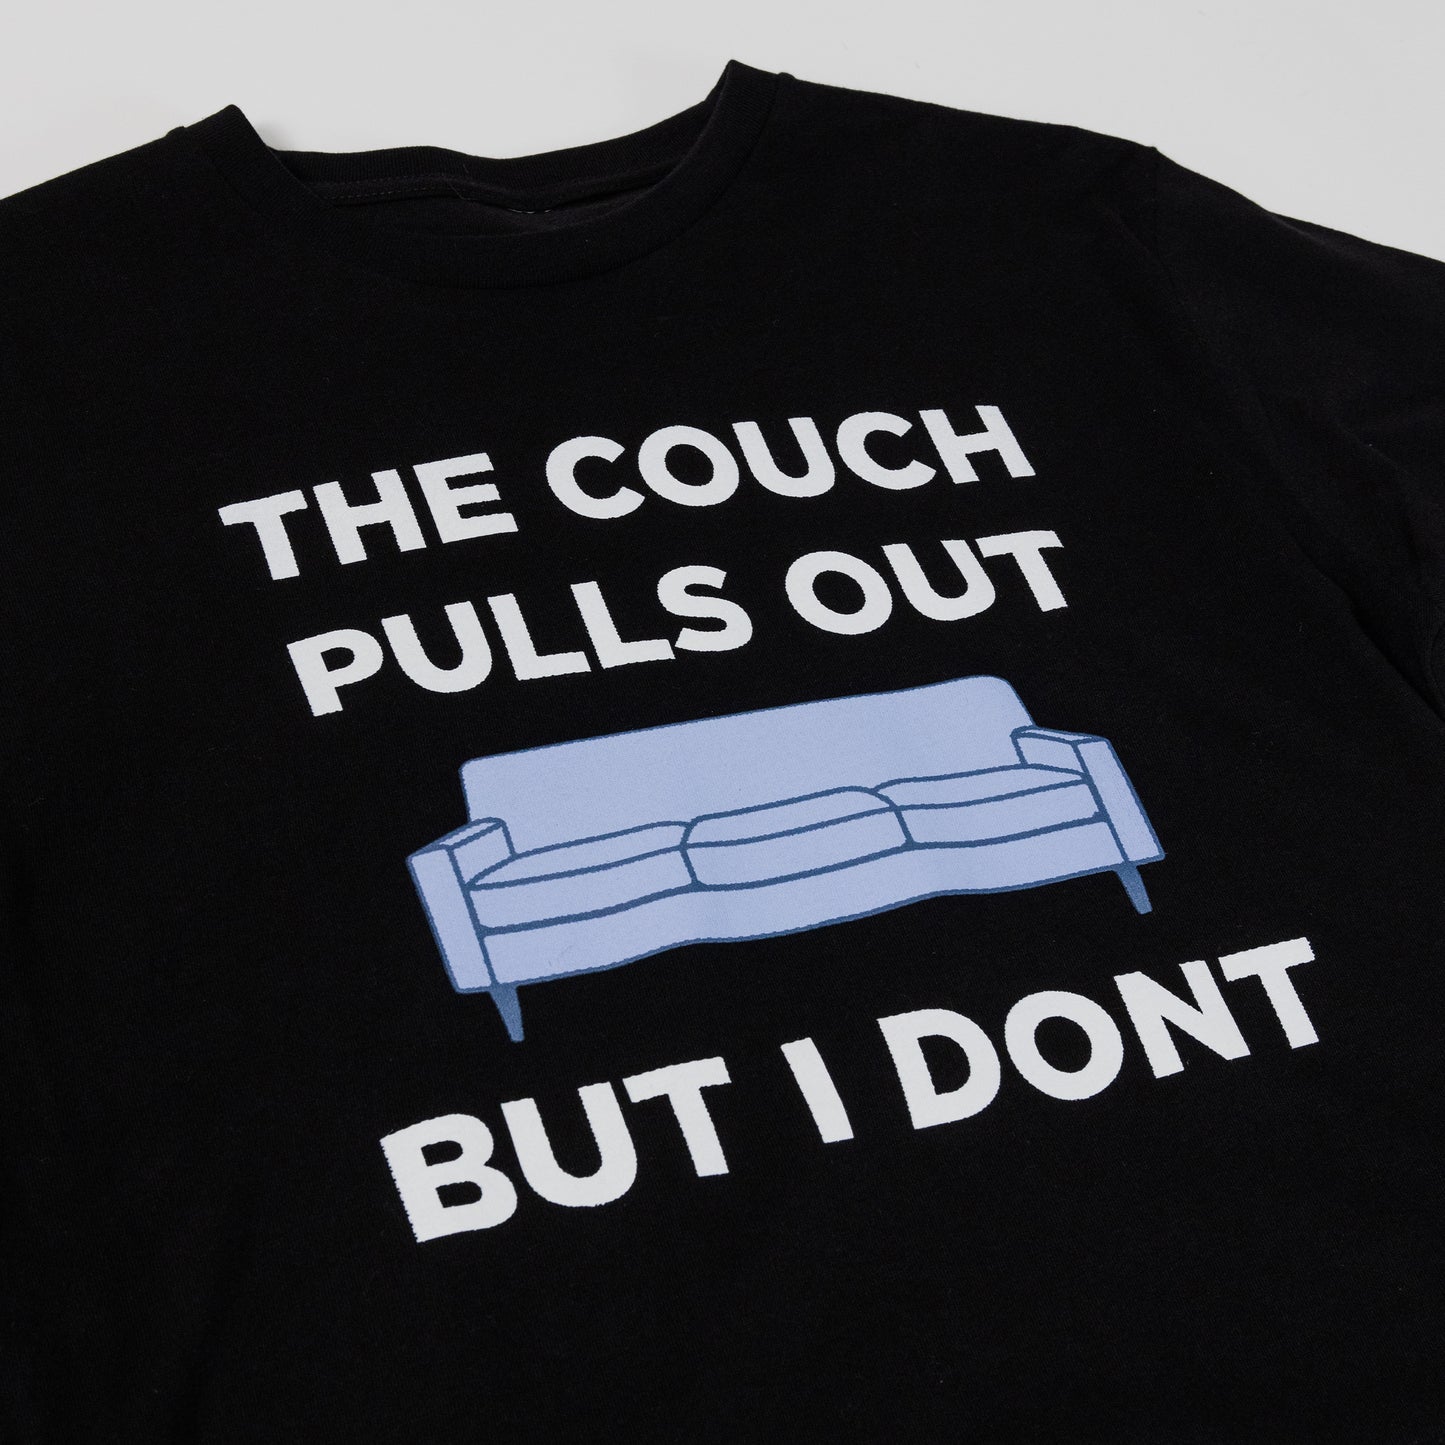 Pull Out Couch Black Tee